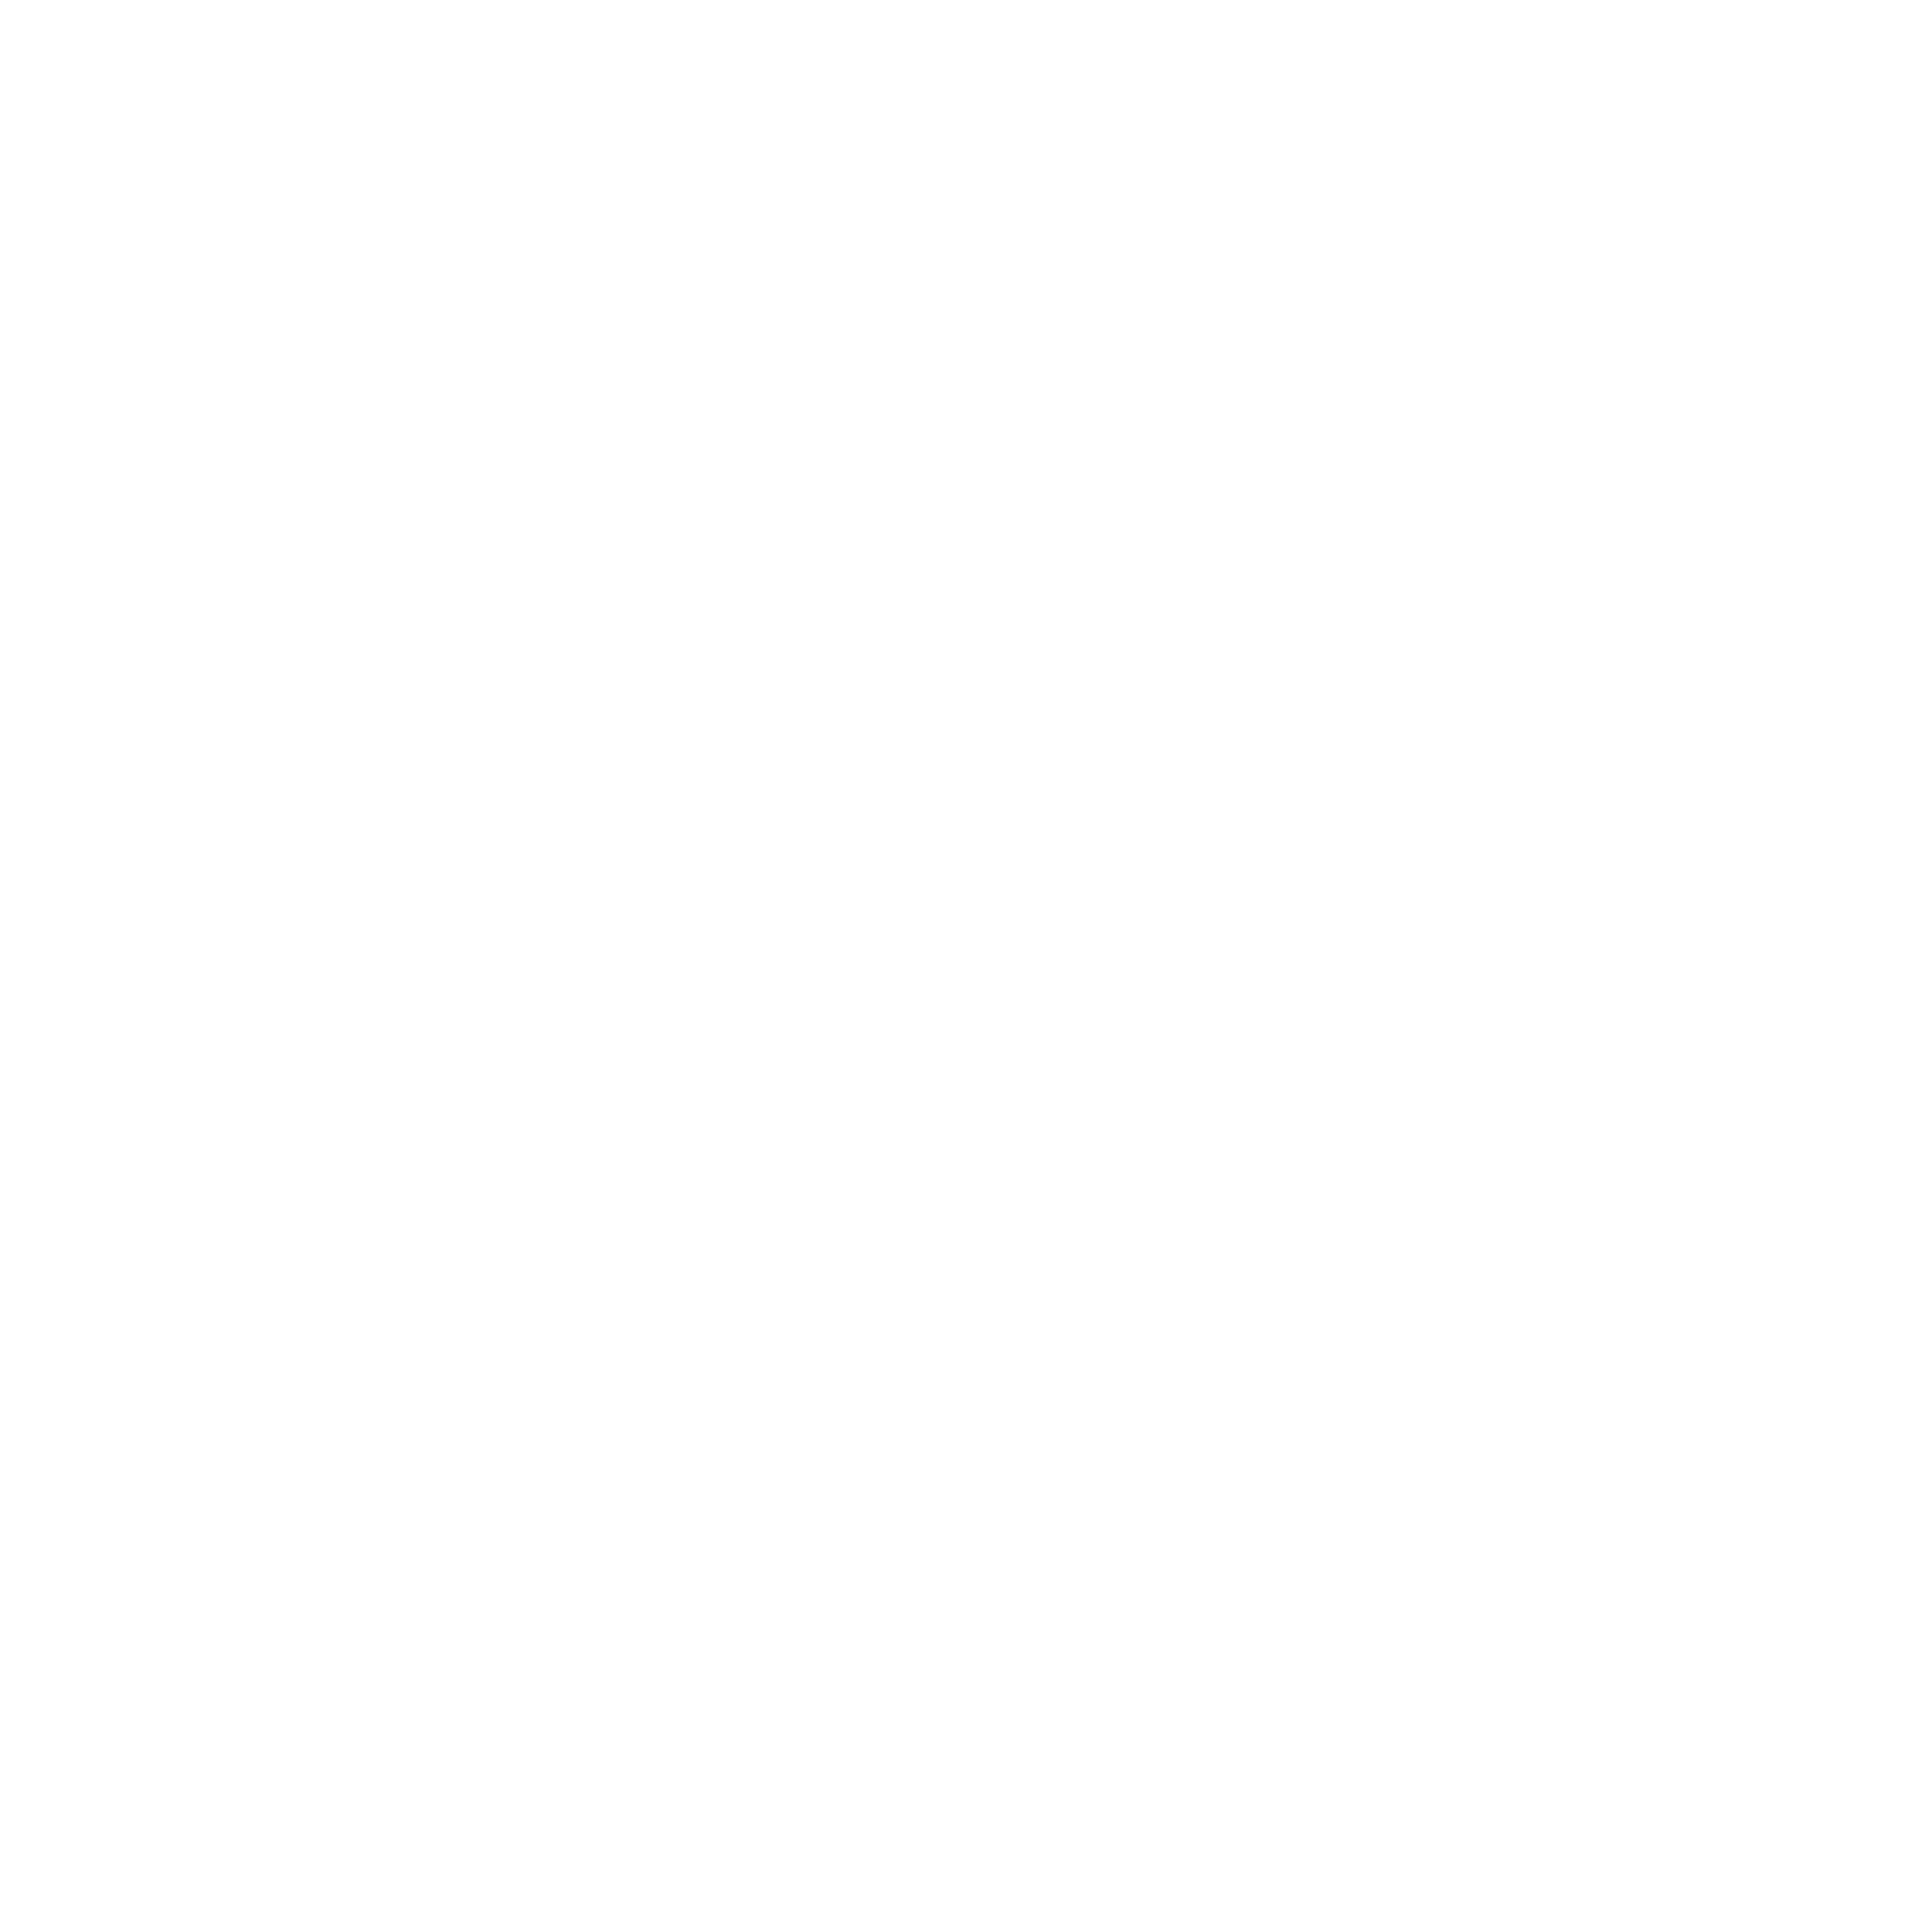 Space in the Gap